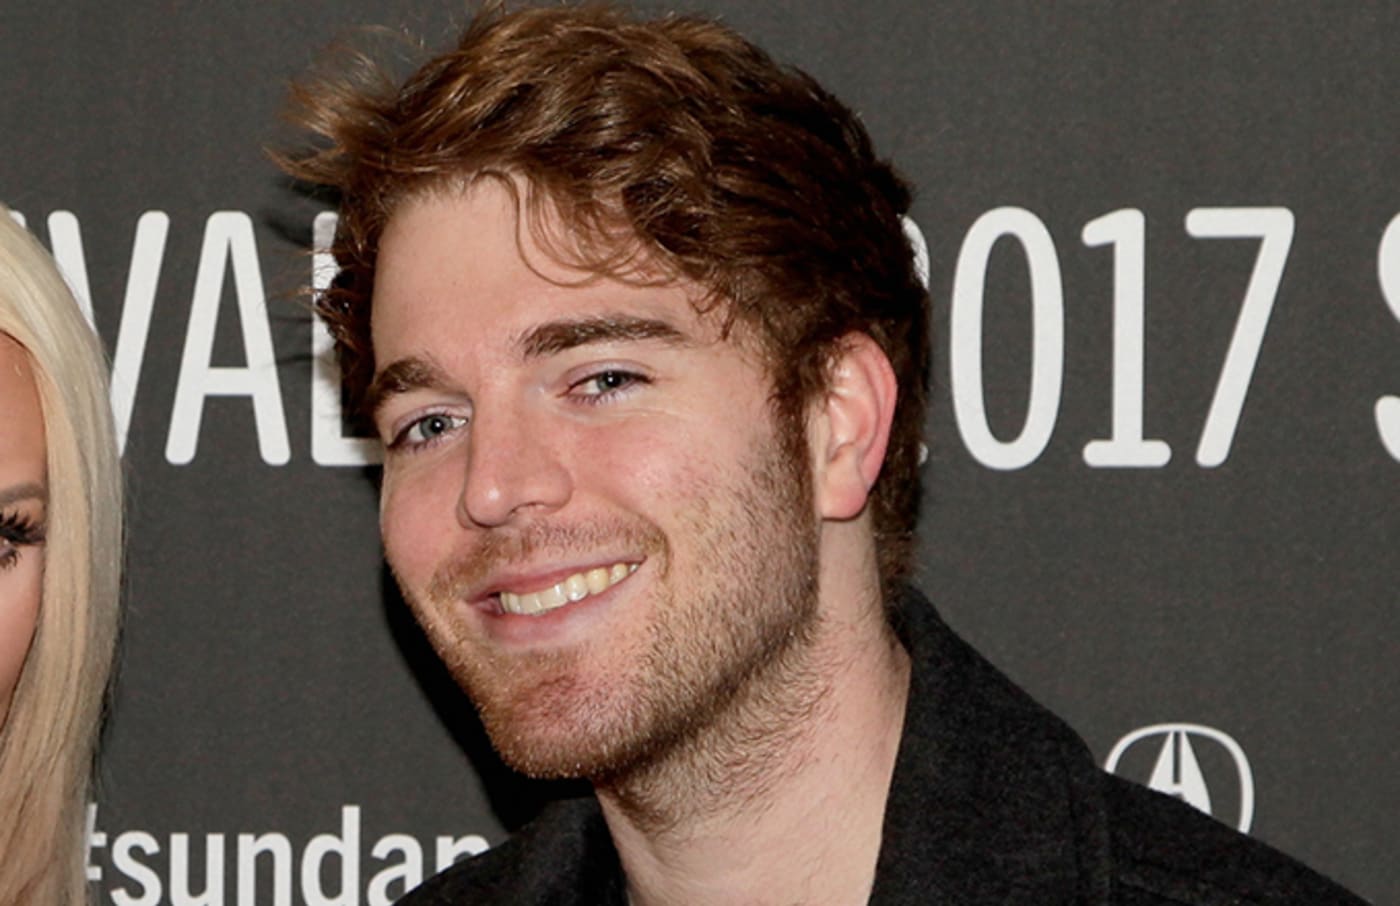 YouTuber Shane Dawson, who says he definitely didn't have sex with his cat.